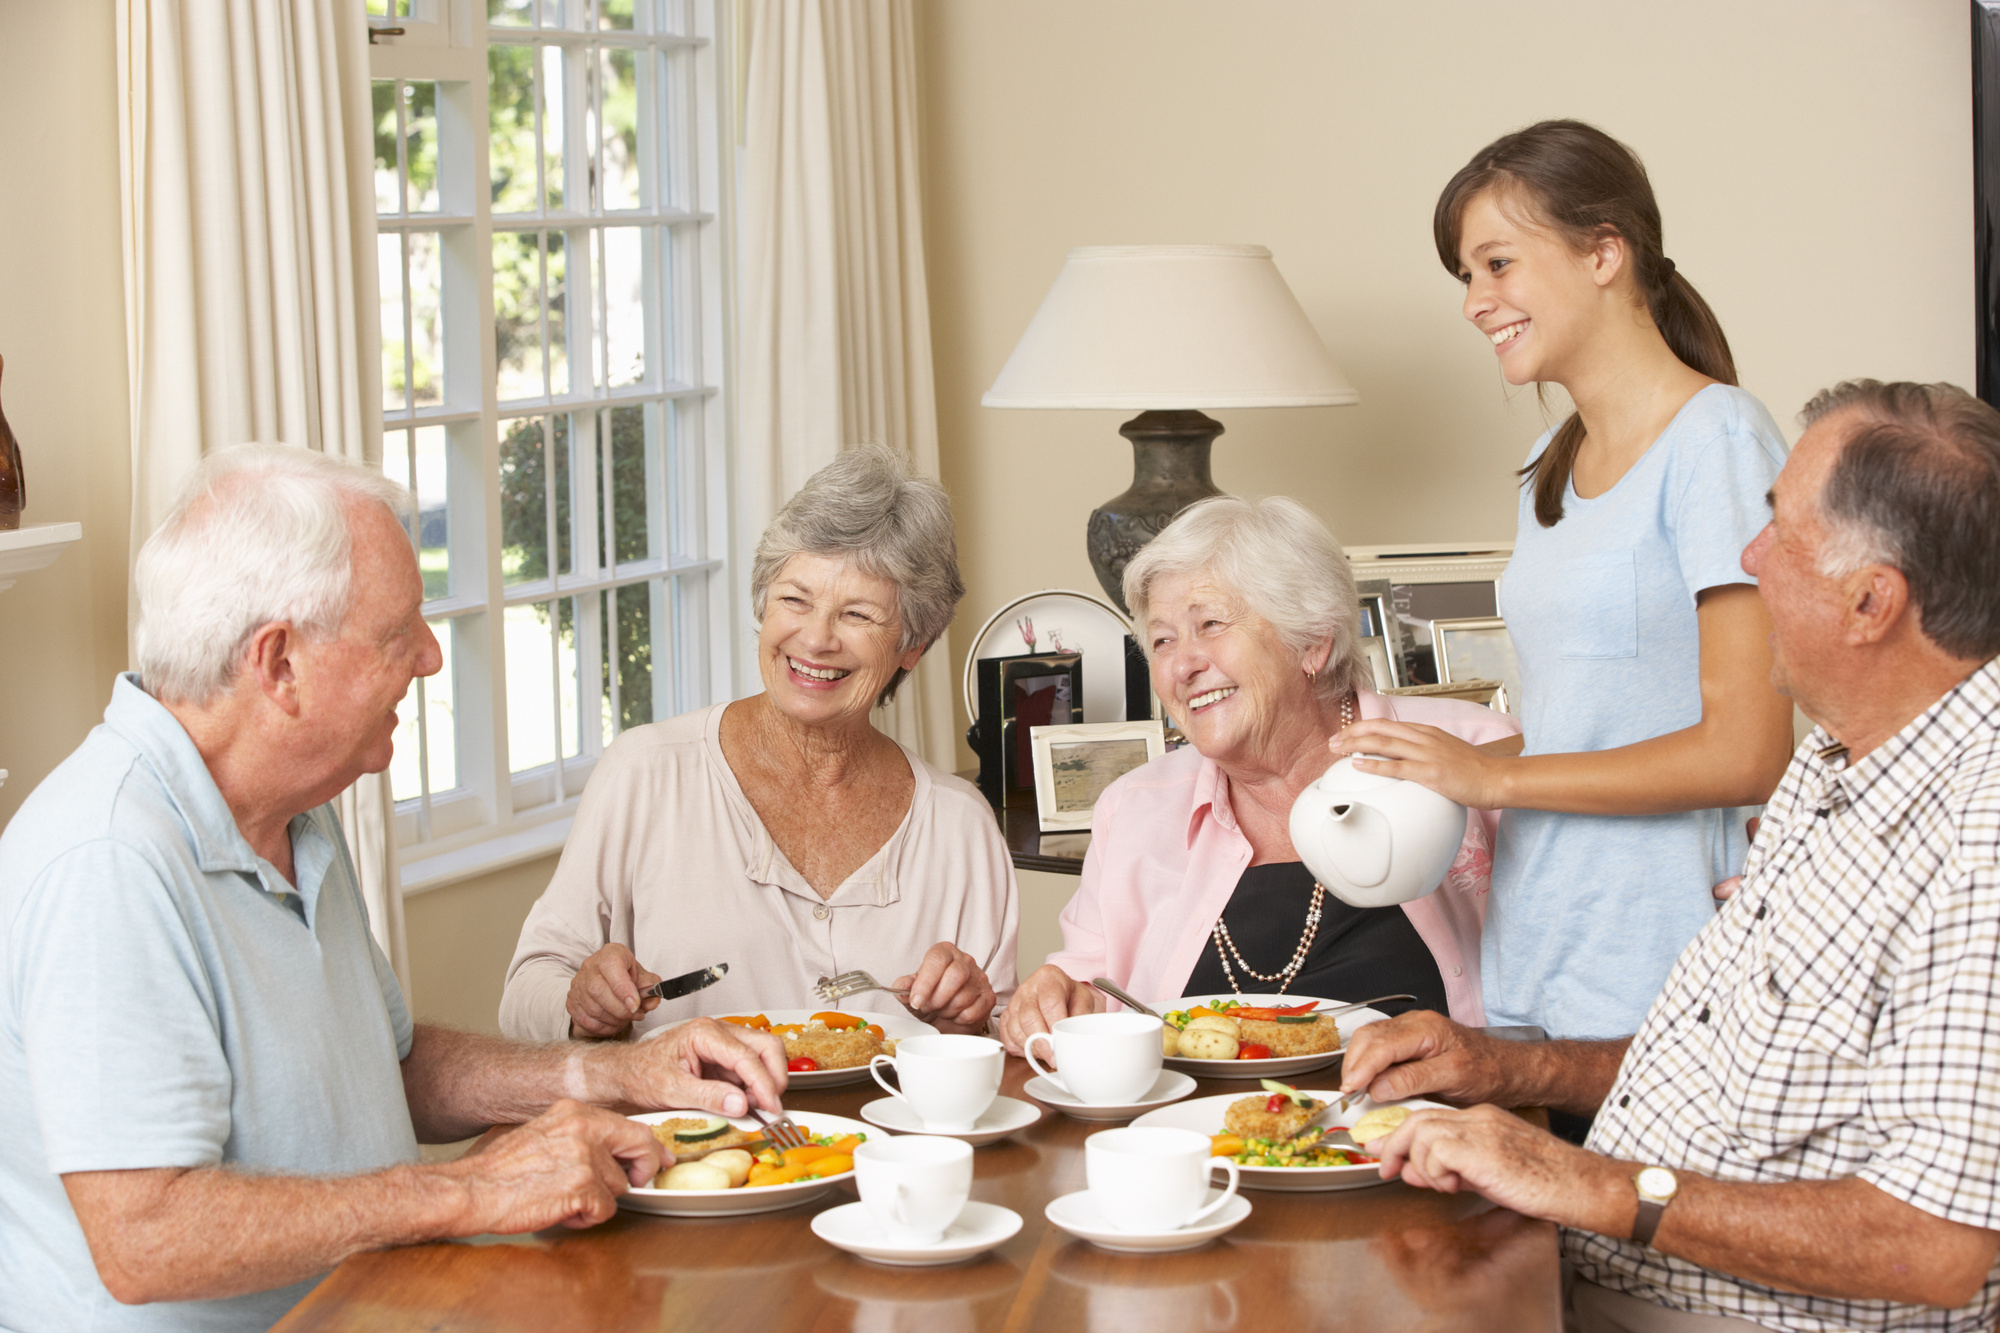 Are you wondering if an adult home is right for your loved one? Click here for three great benefits of living in adult homes to help you decide.